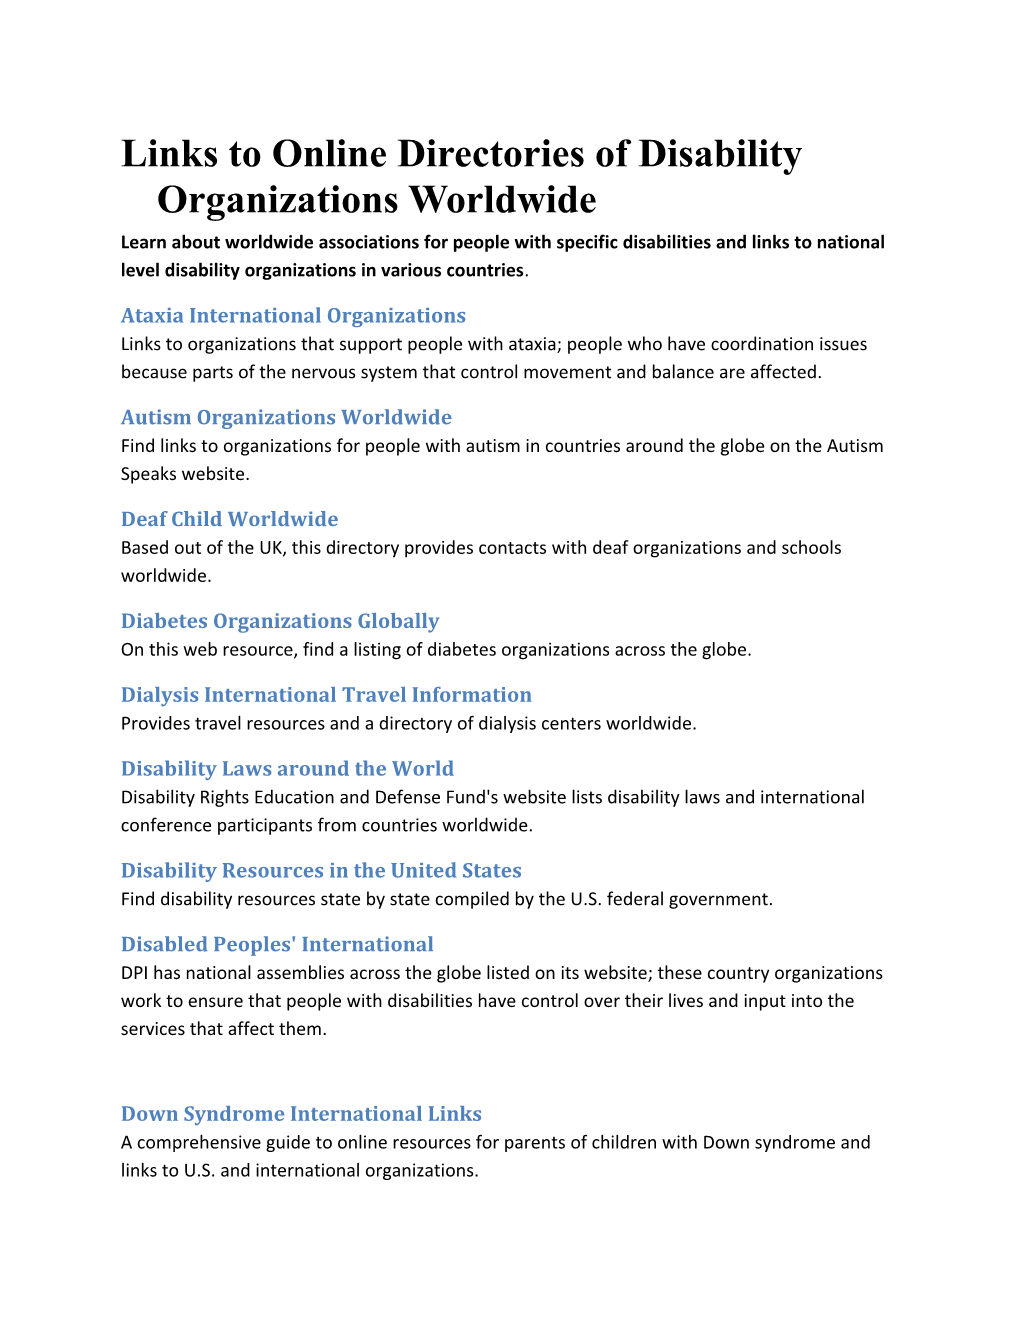 Links to Online Directories of Disability Organizations Worldwide